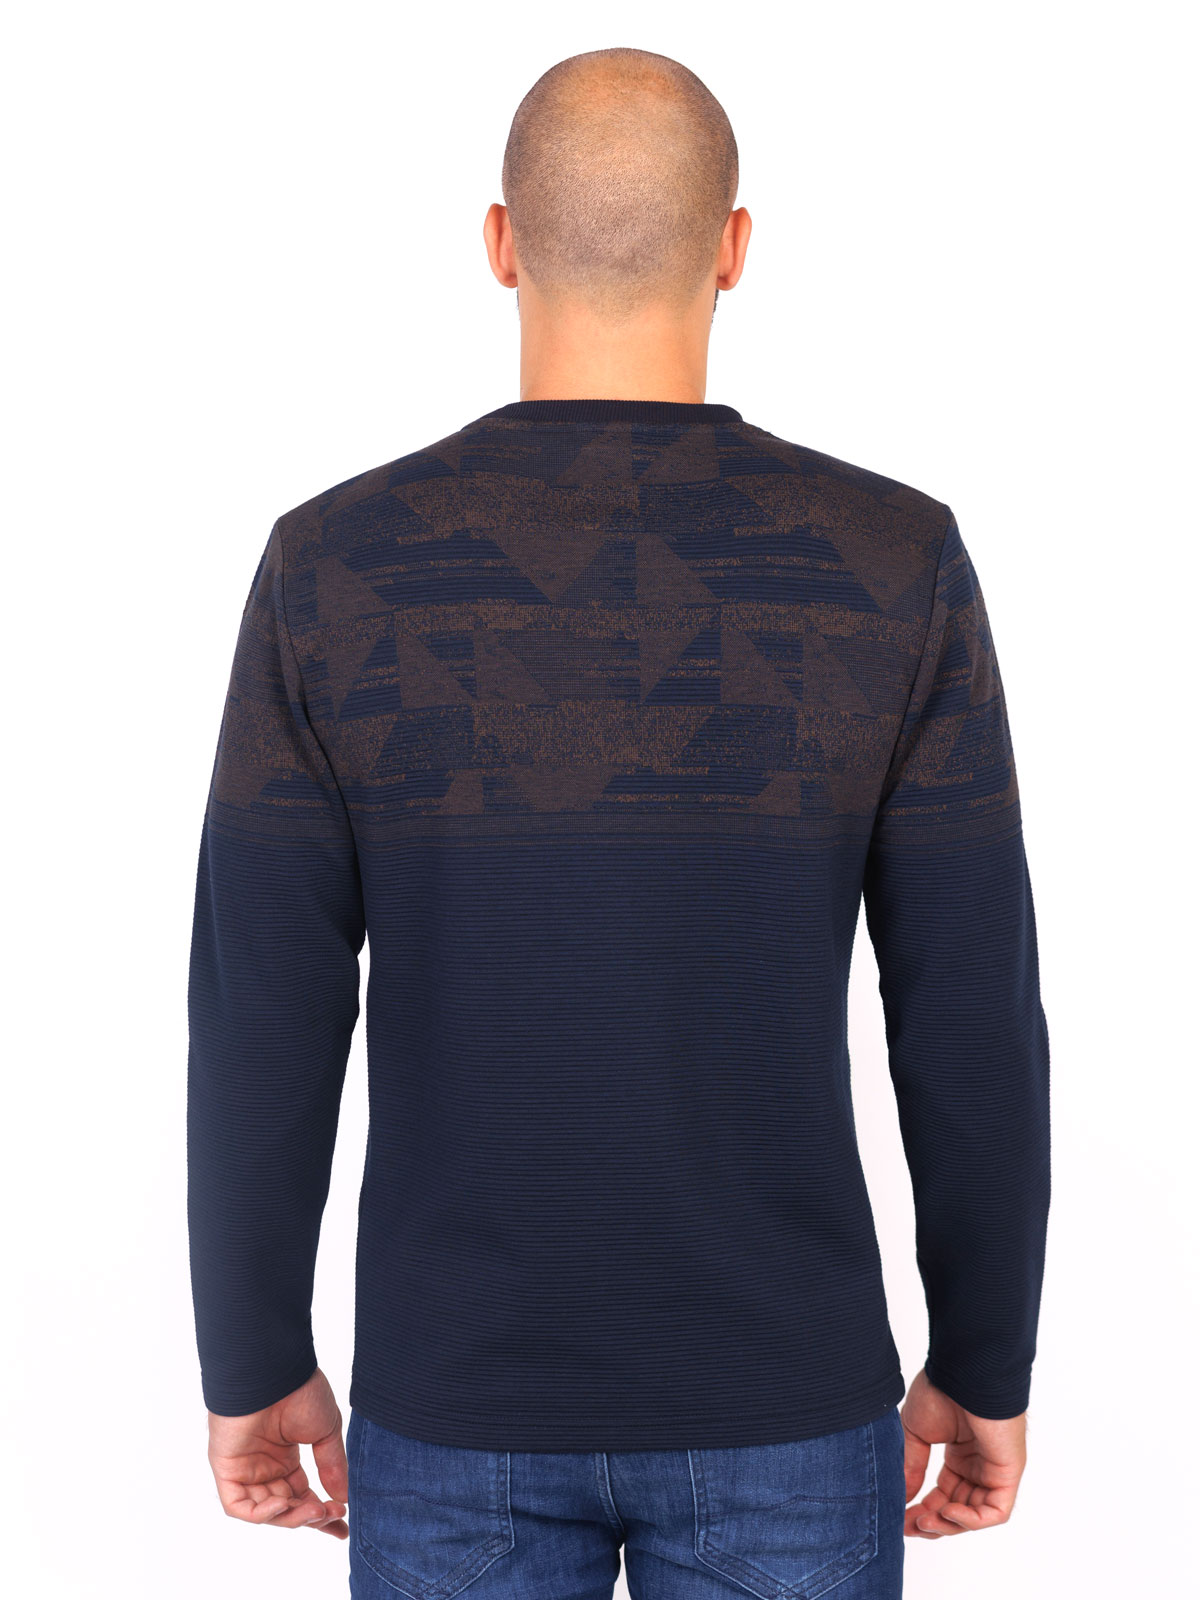 Blouse in dark blue with figures - 42346 € 32.06 img2